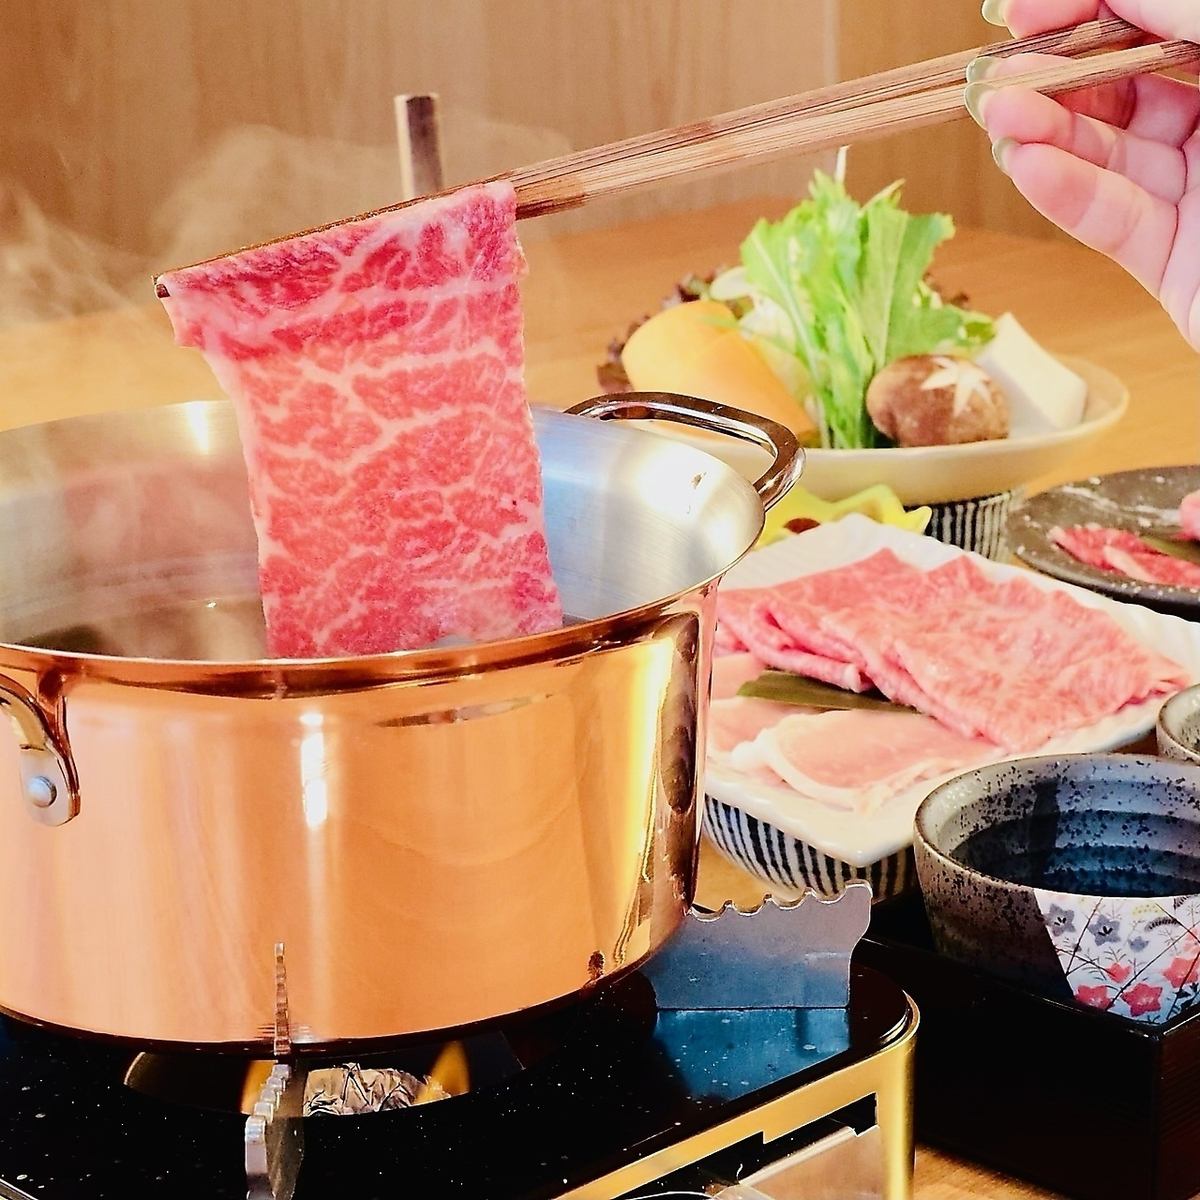 You can enjoy the fine marbling, soft meat quality, rich sweetness and elegant aroma of Matsusaka beef.